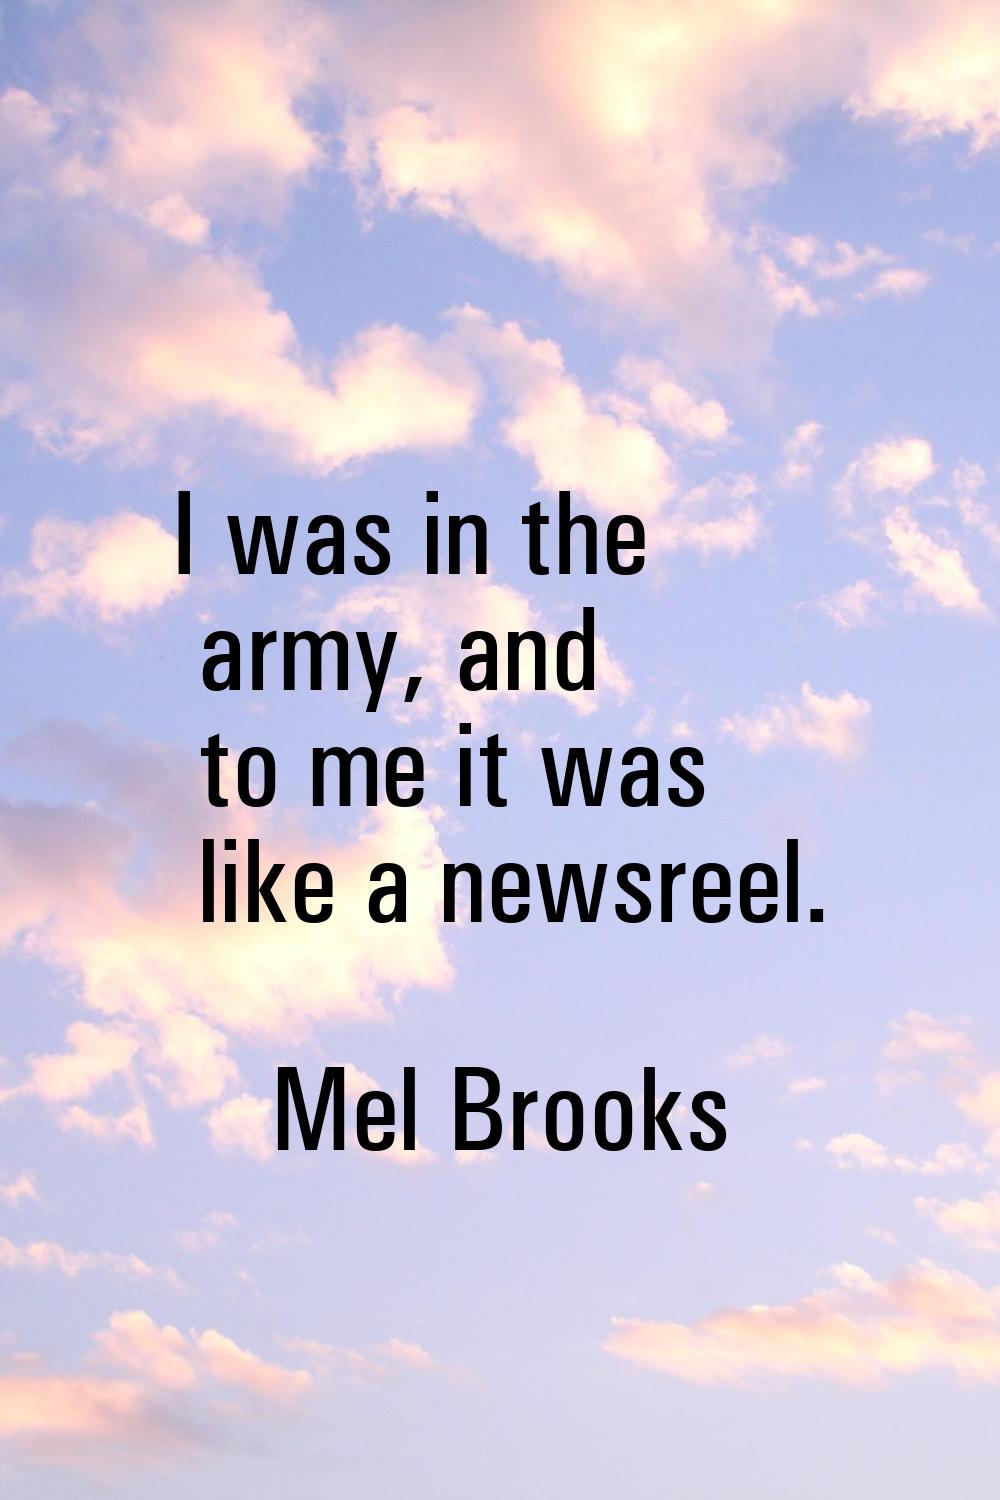 I was in the army, and to me it was like a newsreel.